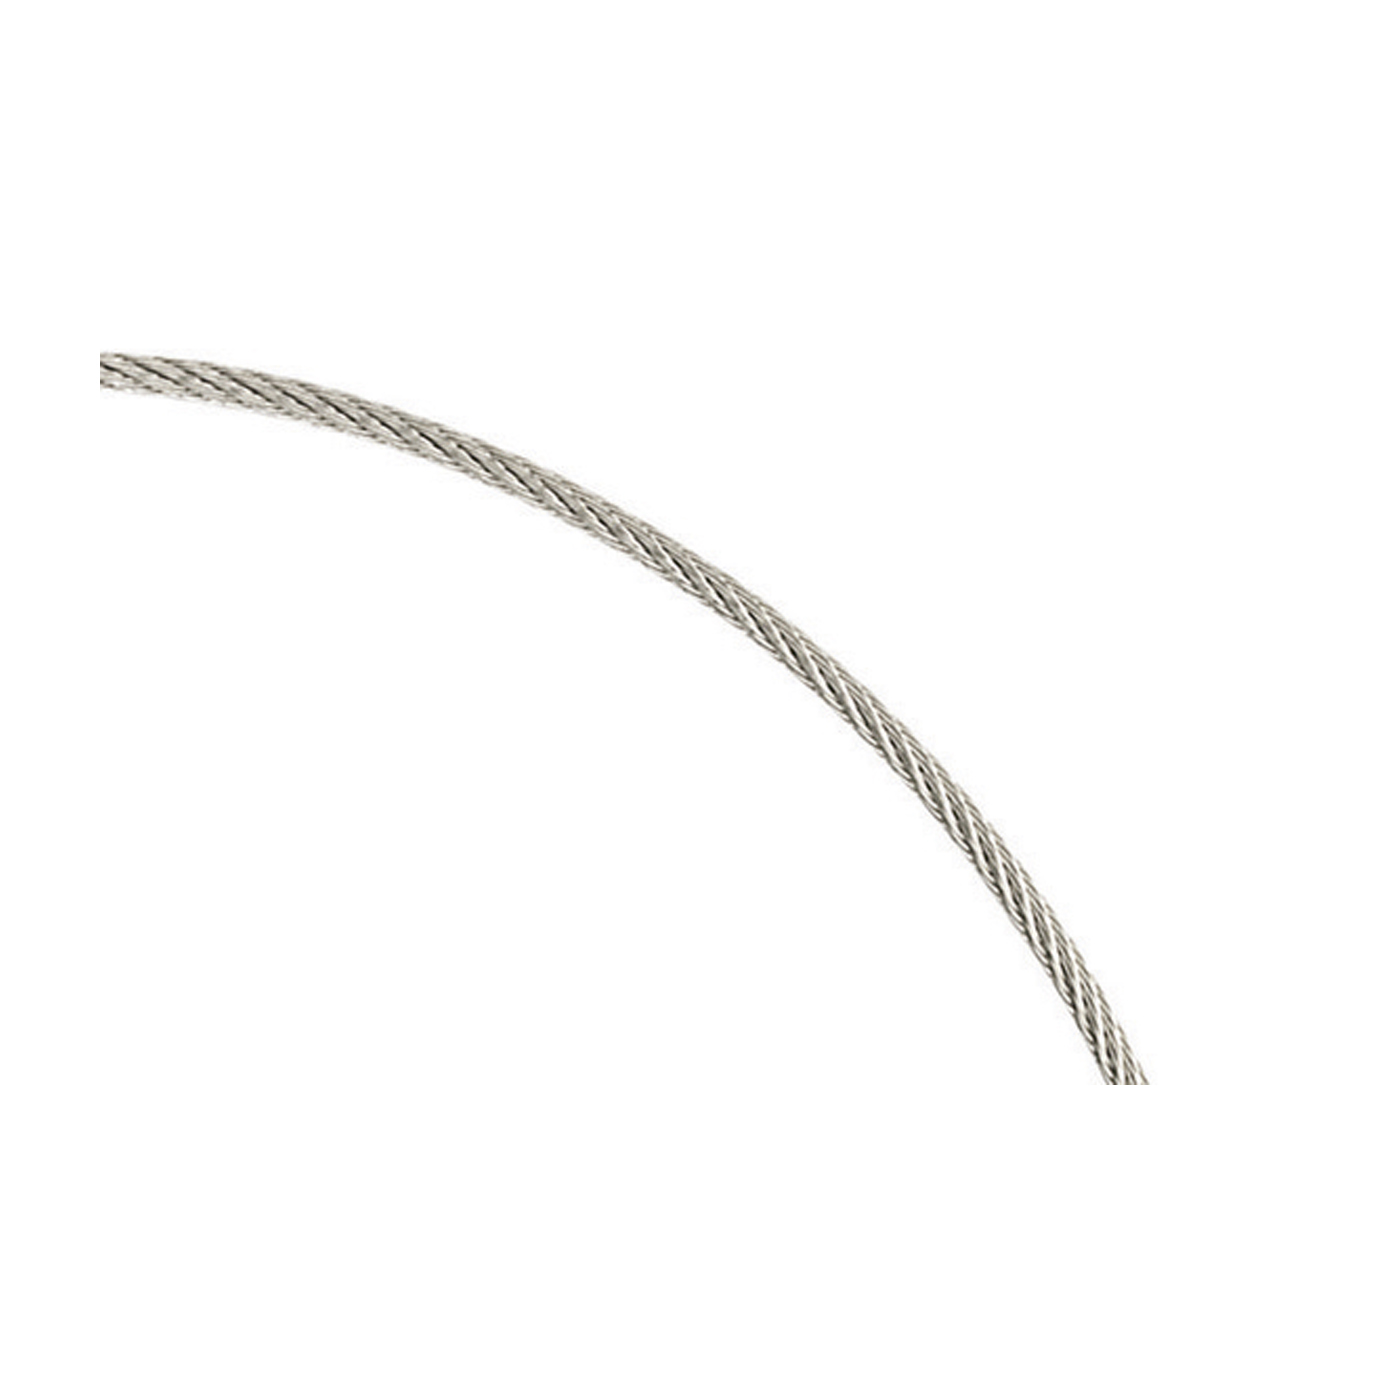 Steel Cable Neck Wire, ø 0.72 mm, 42 cm - 1 piece